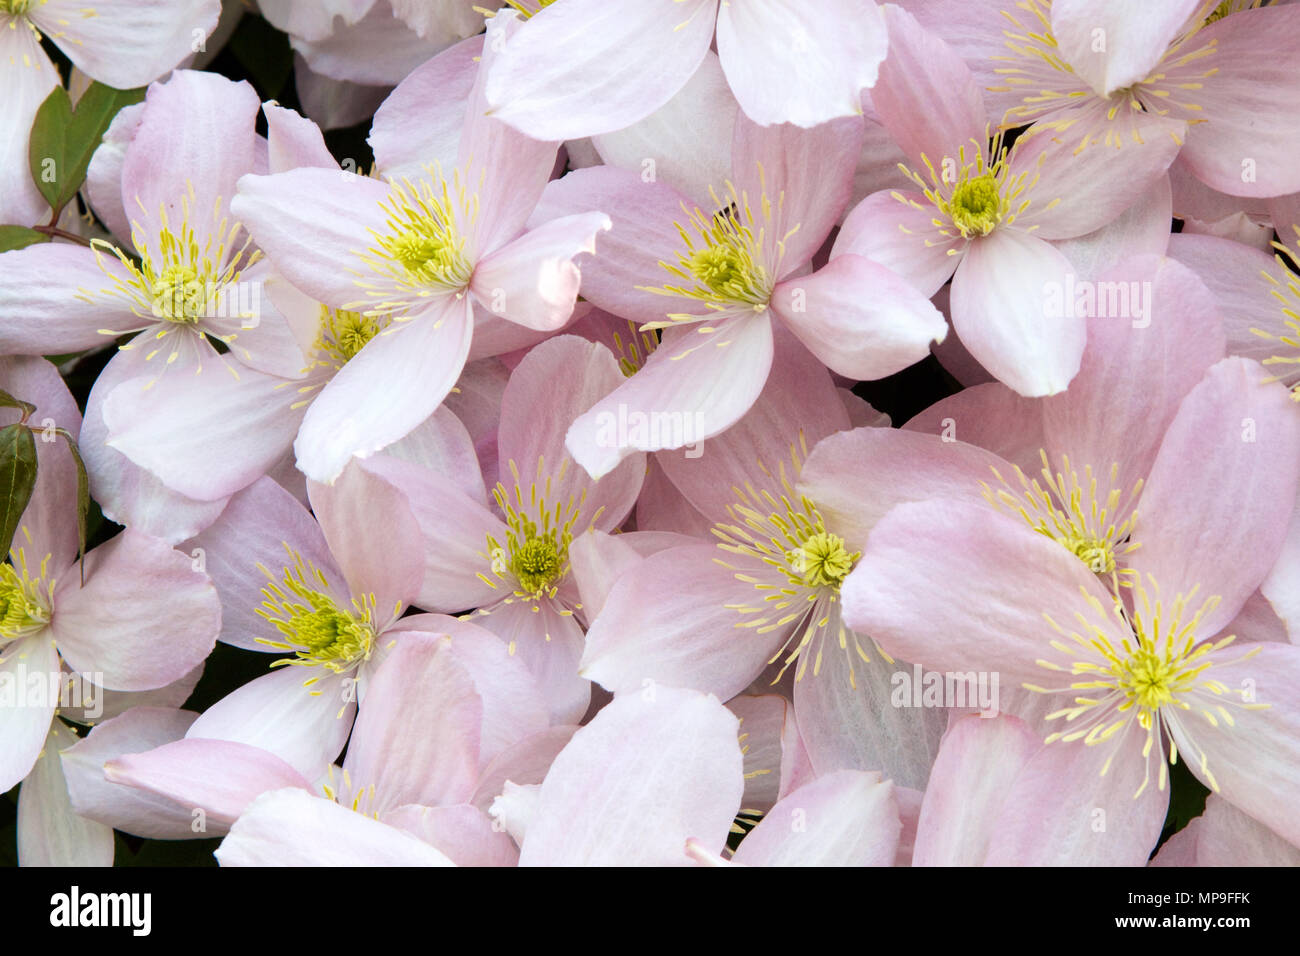 A Clematis Montana climbing plant with flowers in full bloom with pink petals and yellow stamen set against green leaves taken on a sunny late Spring  Stock Photo